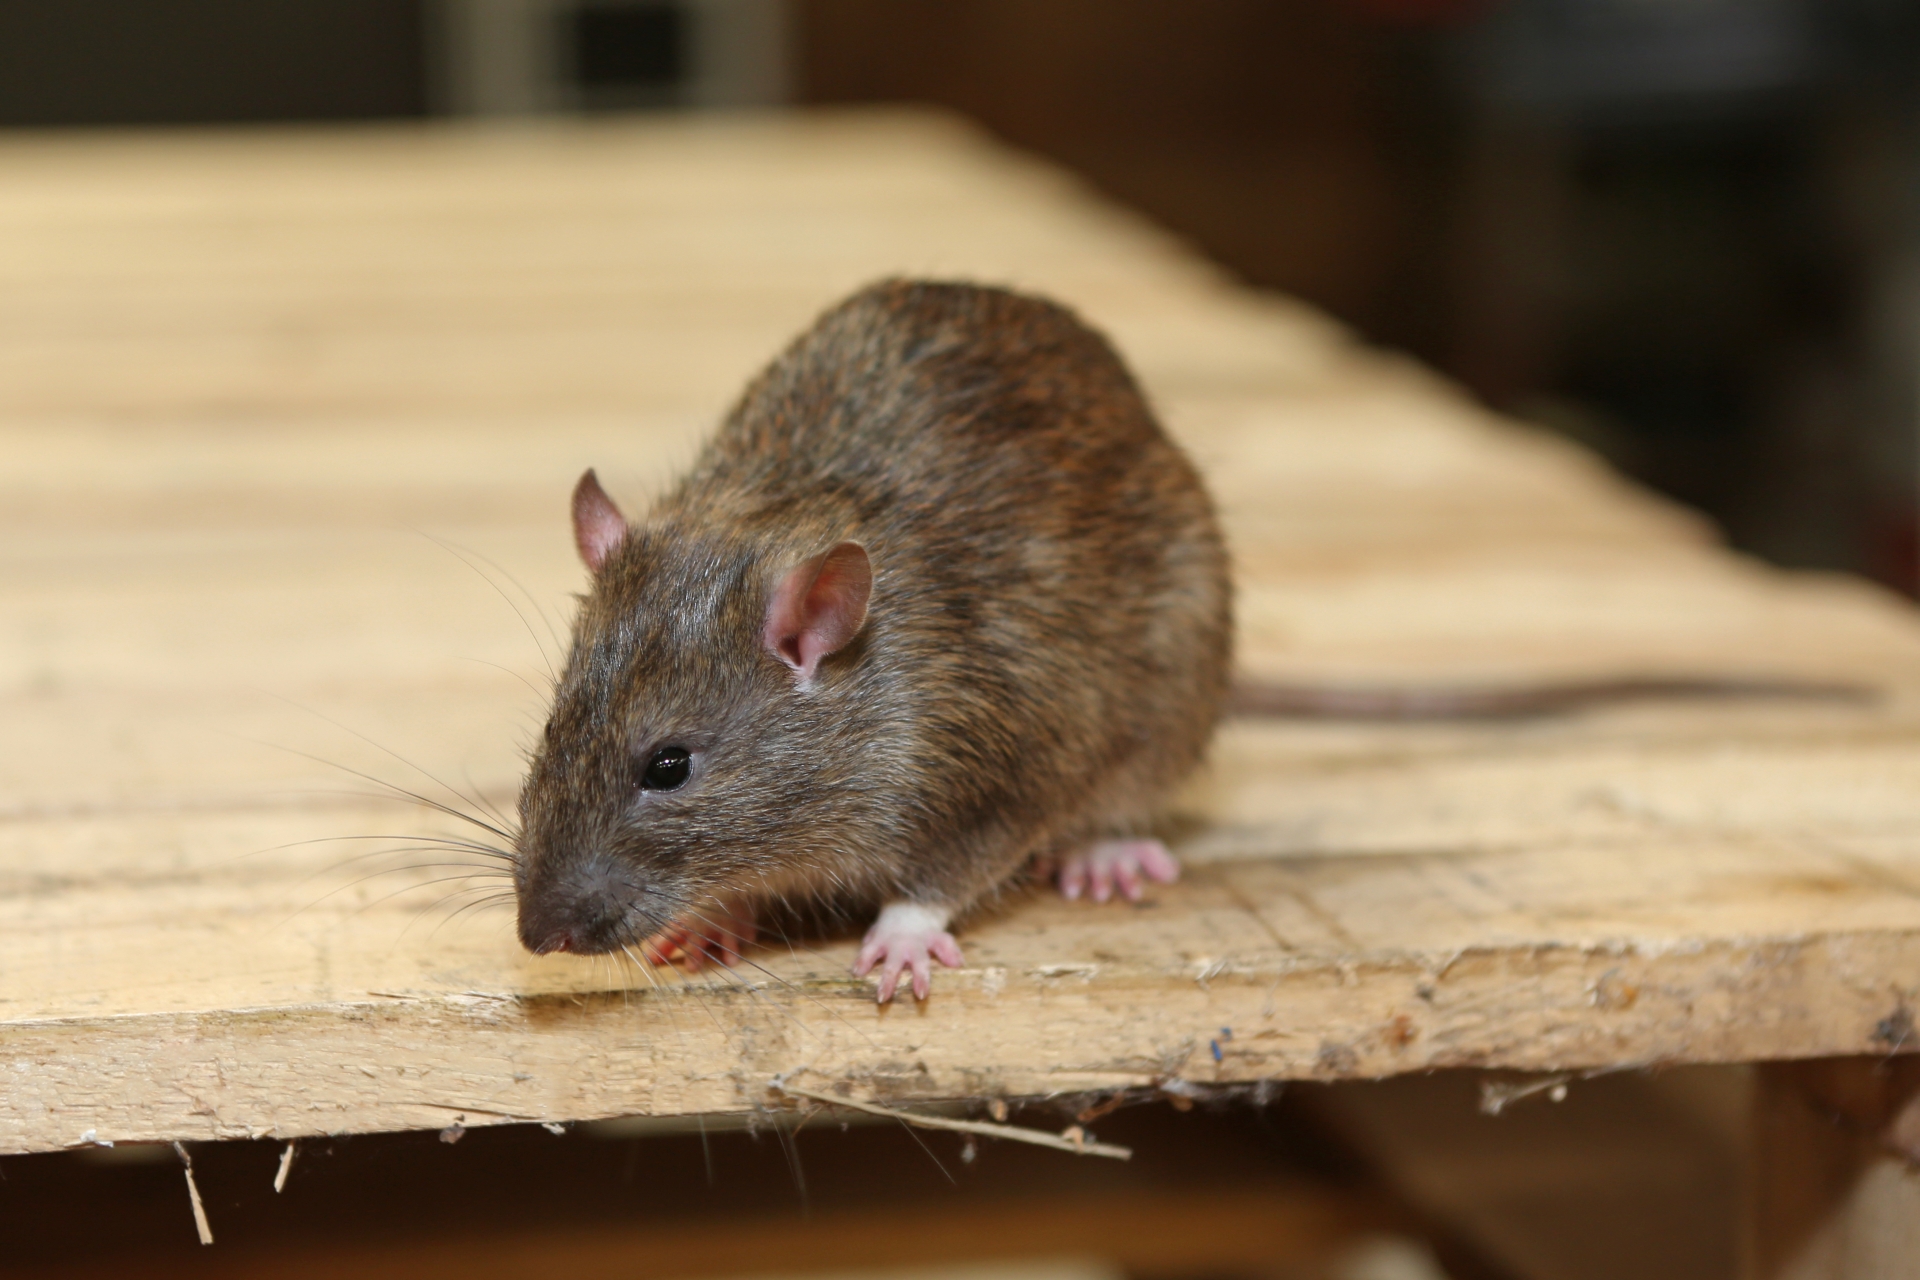 Rat Control, Pest Control in Canning Town, North Woolwich, E16. Call Now 020 8166 9746